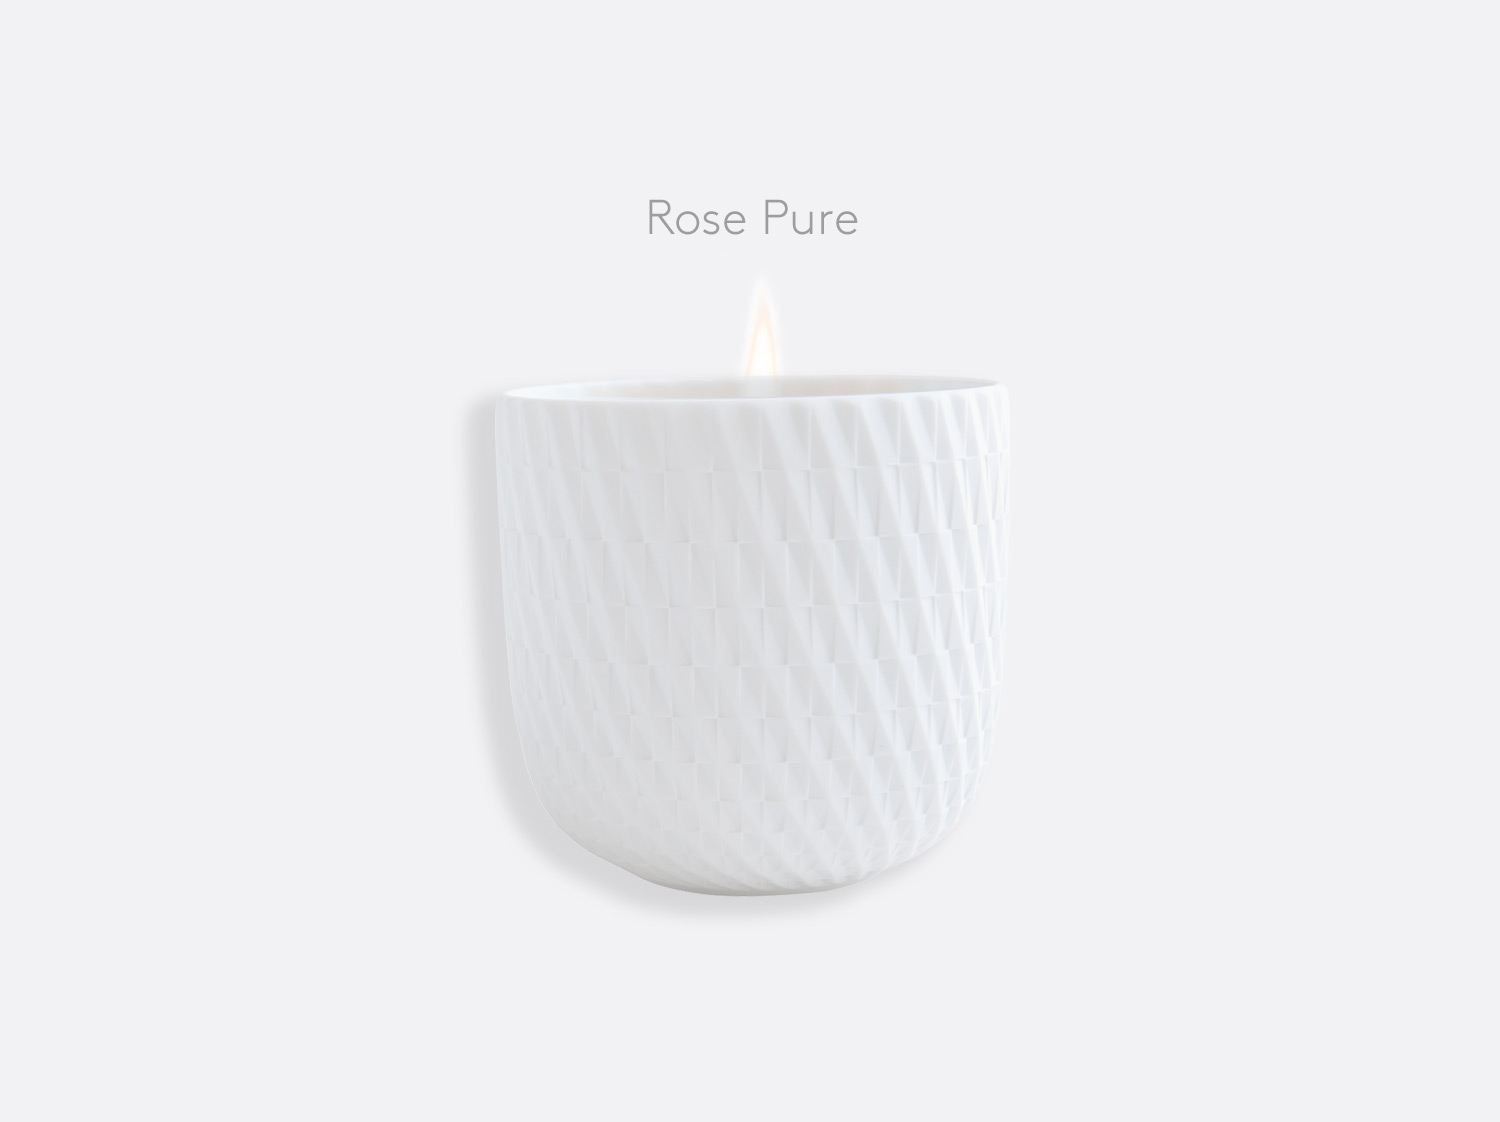 China "Rose Pure" refillable candle tumbler 7 oz - engraved bisque porcelain of the collection TWIST | Bernardaud